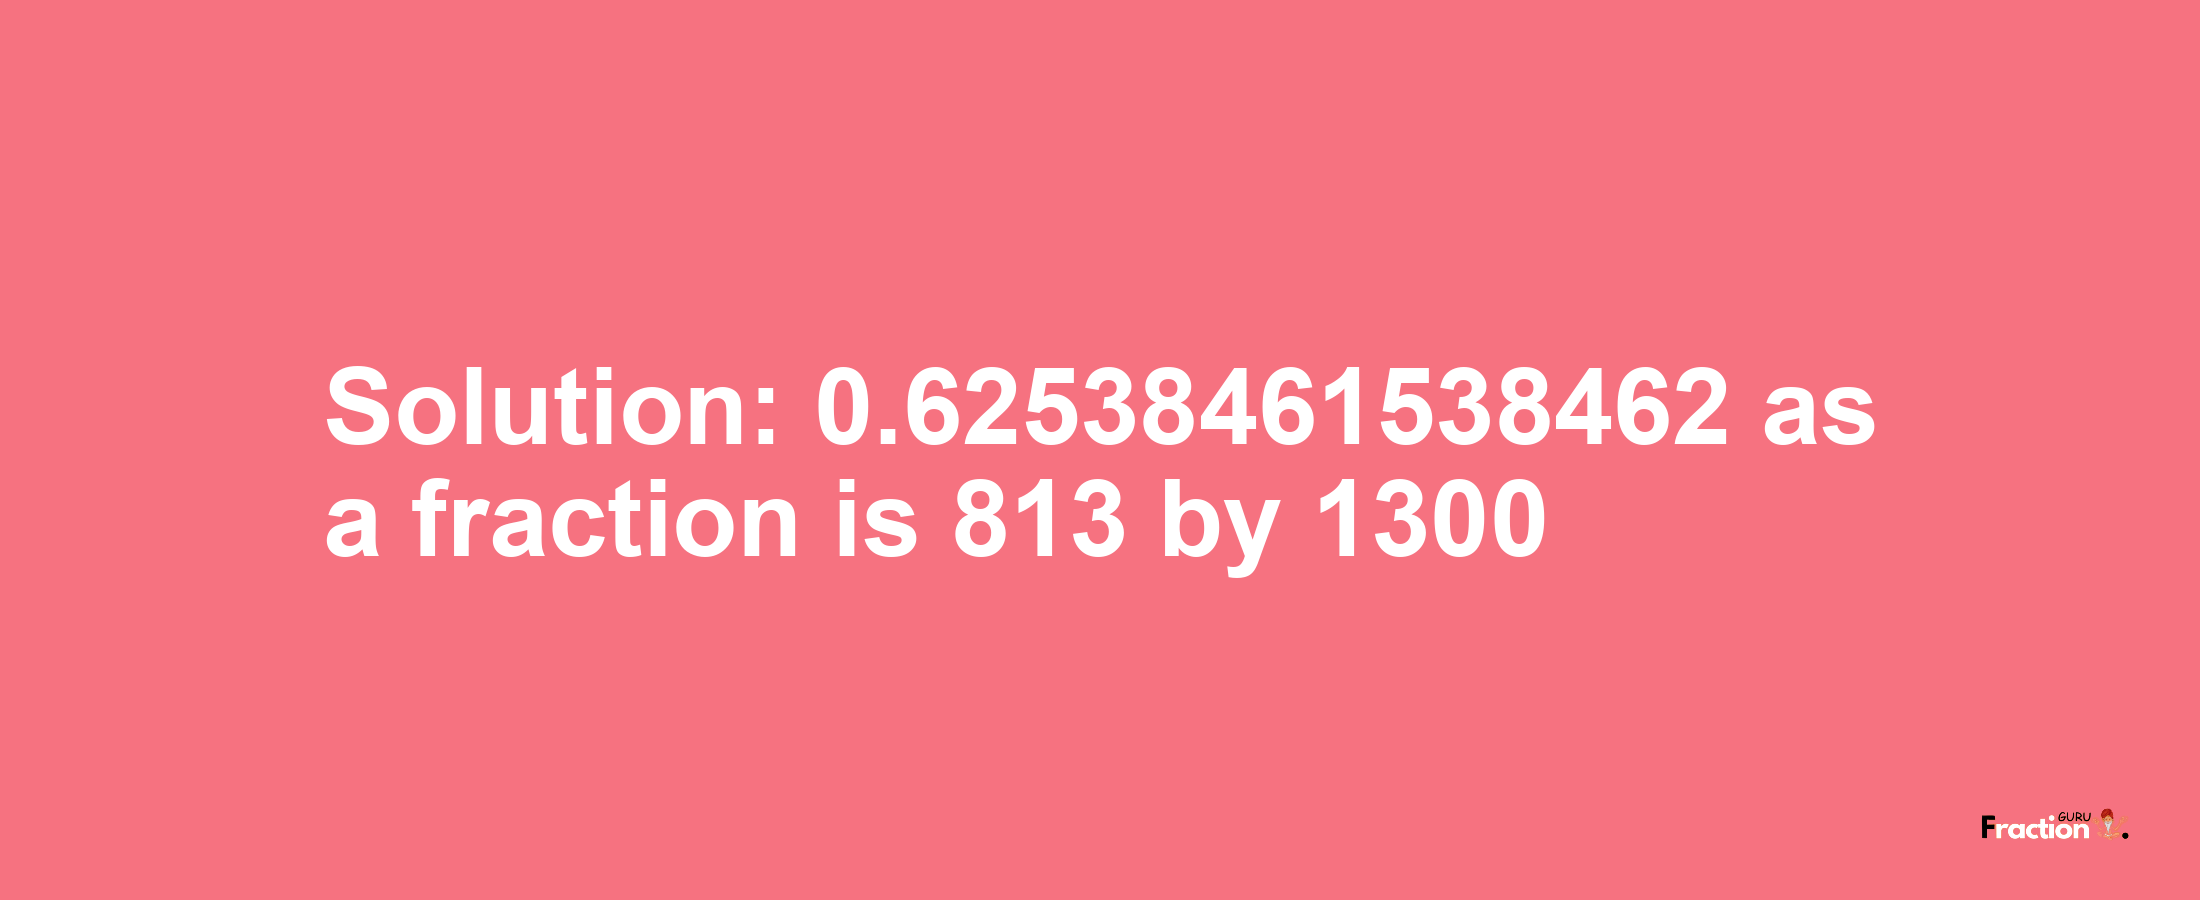 Solution:0.62538461538462 as a fraction is 813/1300